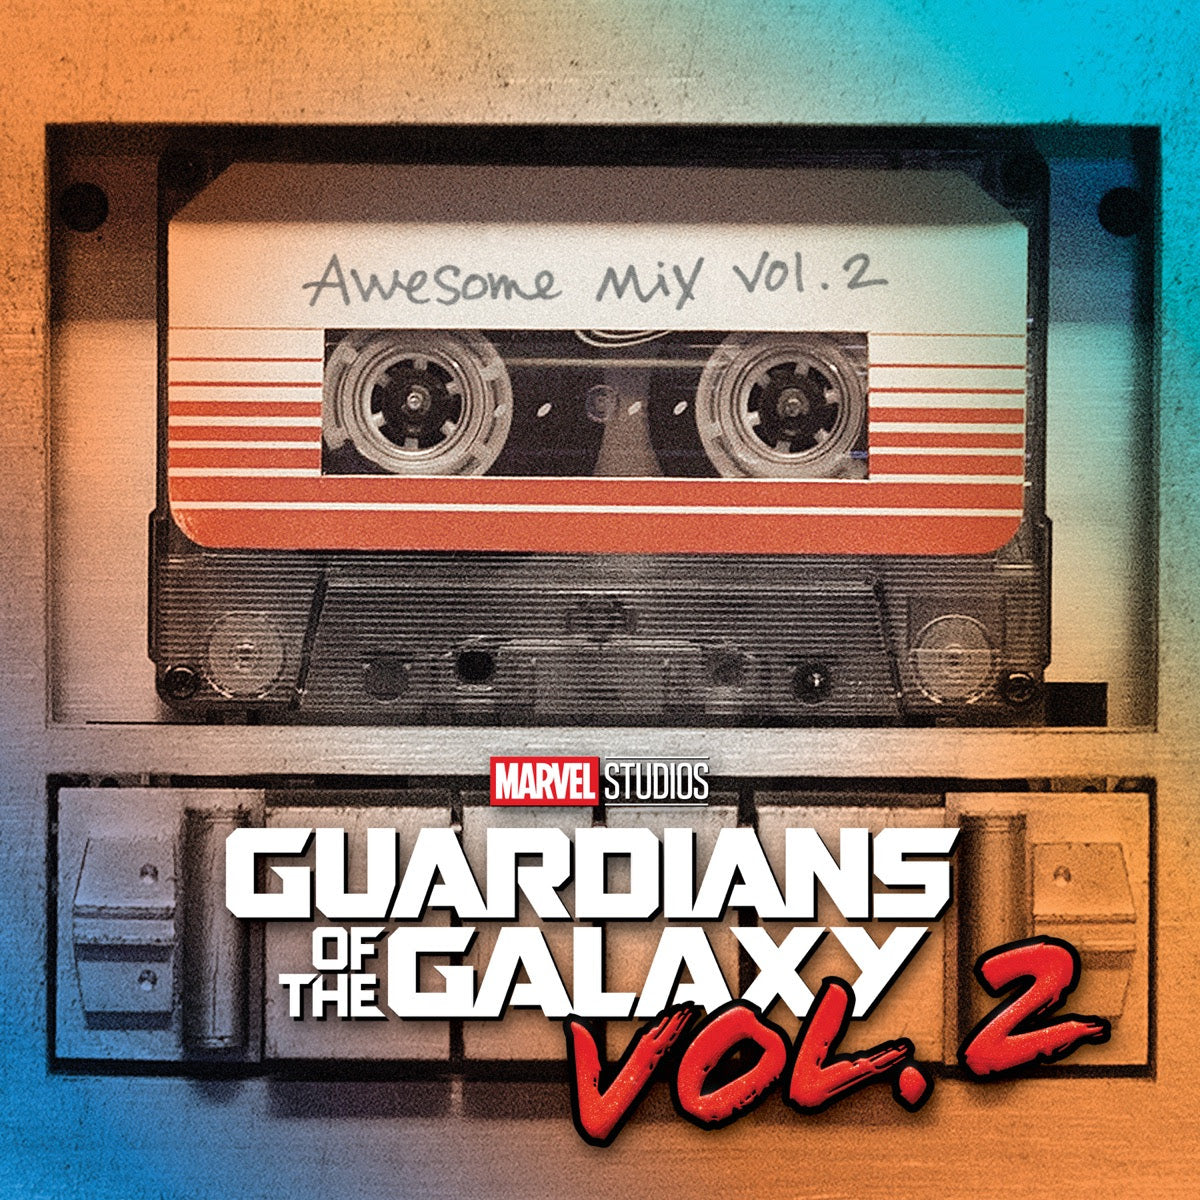 VA - Guardians Of The Galaxy Vol. 2: Awesome Mix Vol. 2 | Buy the Vinyl LP from Flying Nun Records